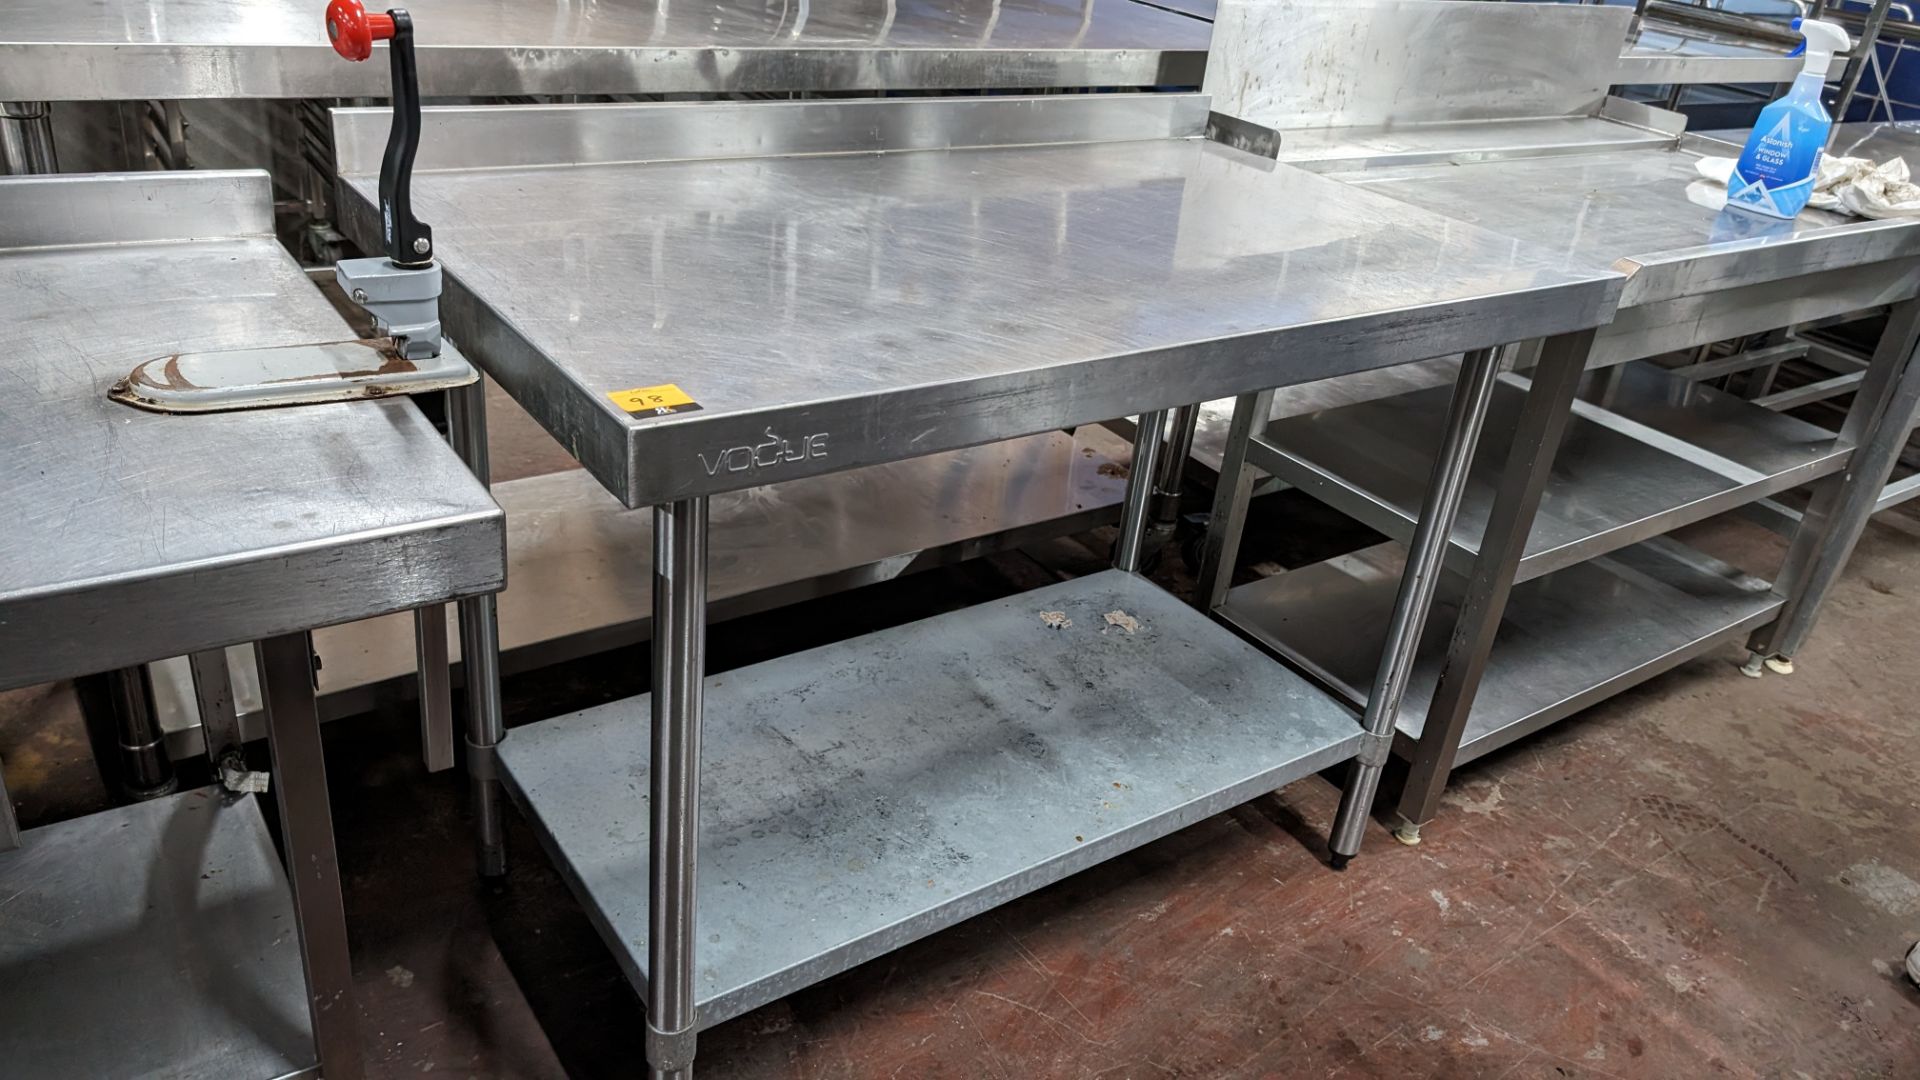 Vogue stainless steel twin tier table with splashback to top shelf, max external dimensions 1200 x 7 - Image 2 of 3